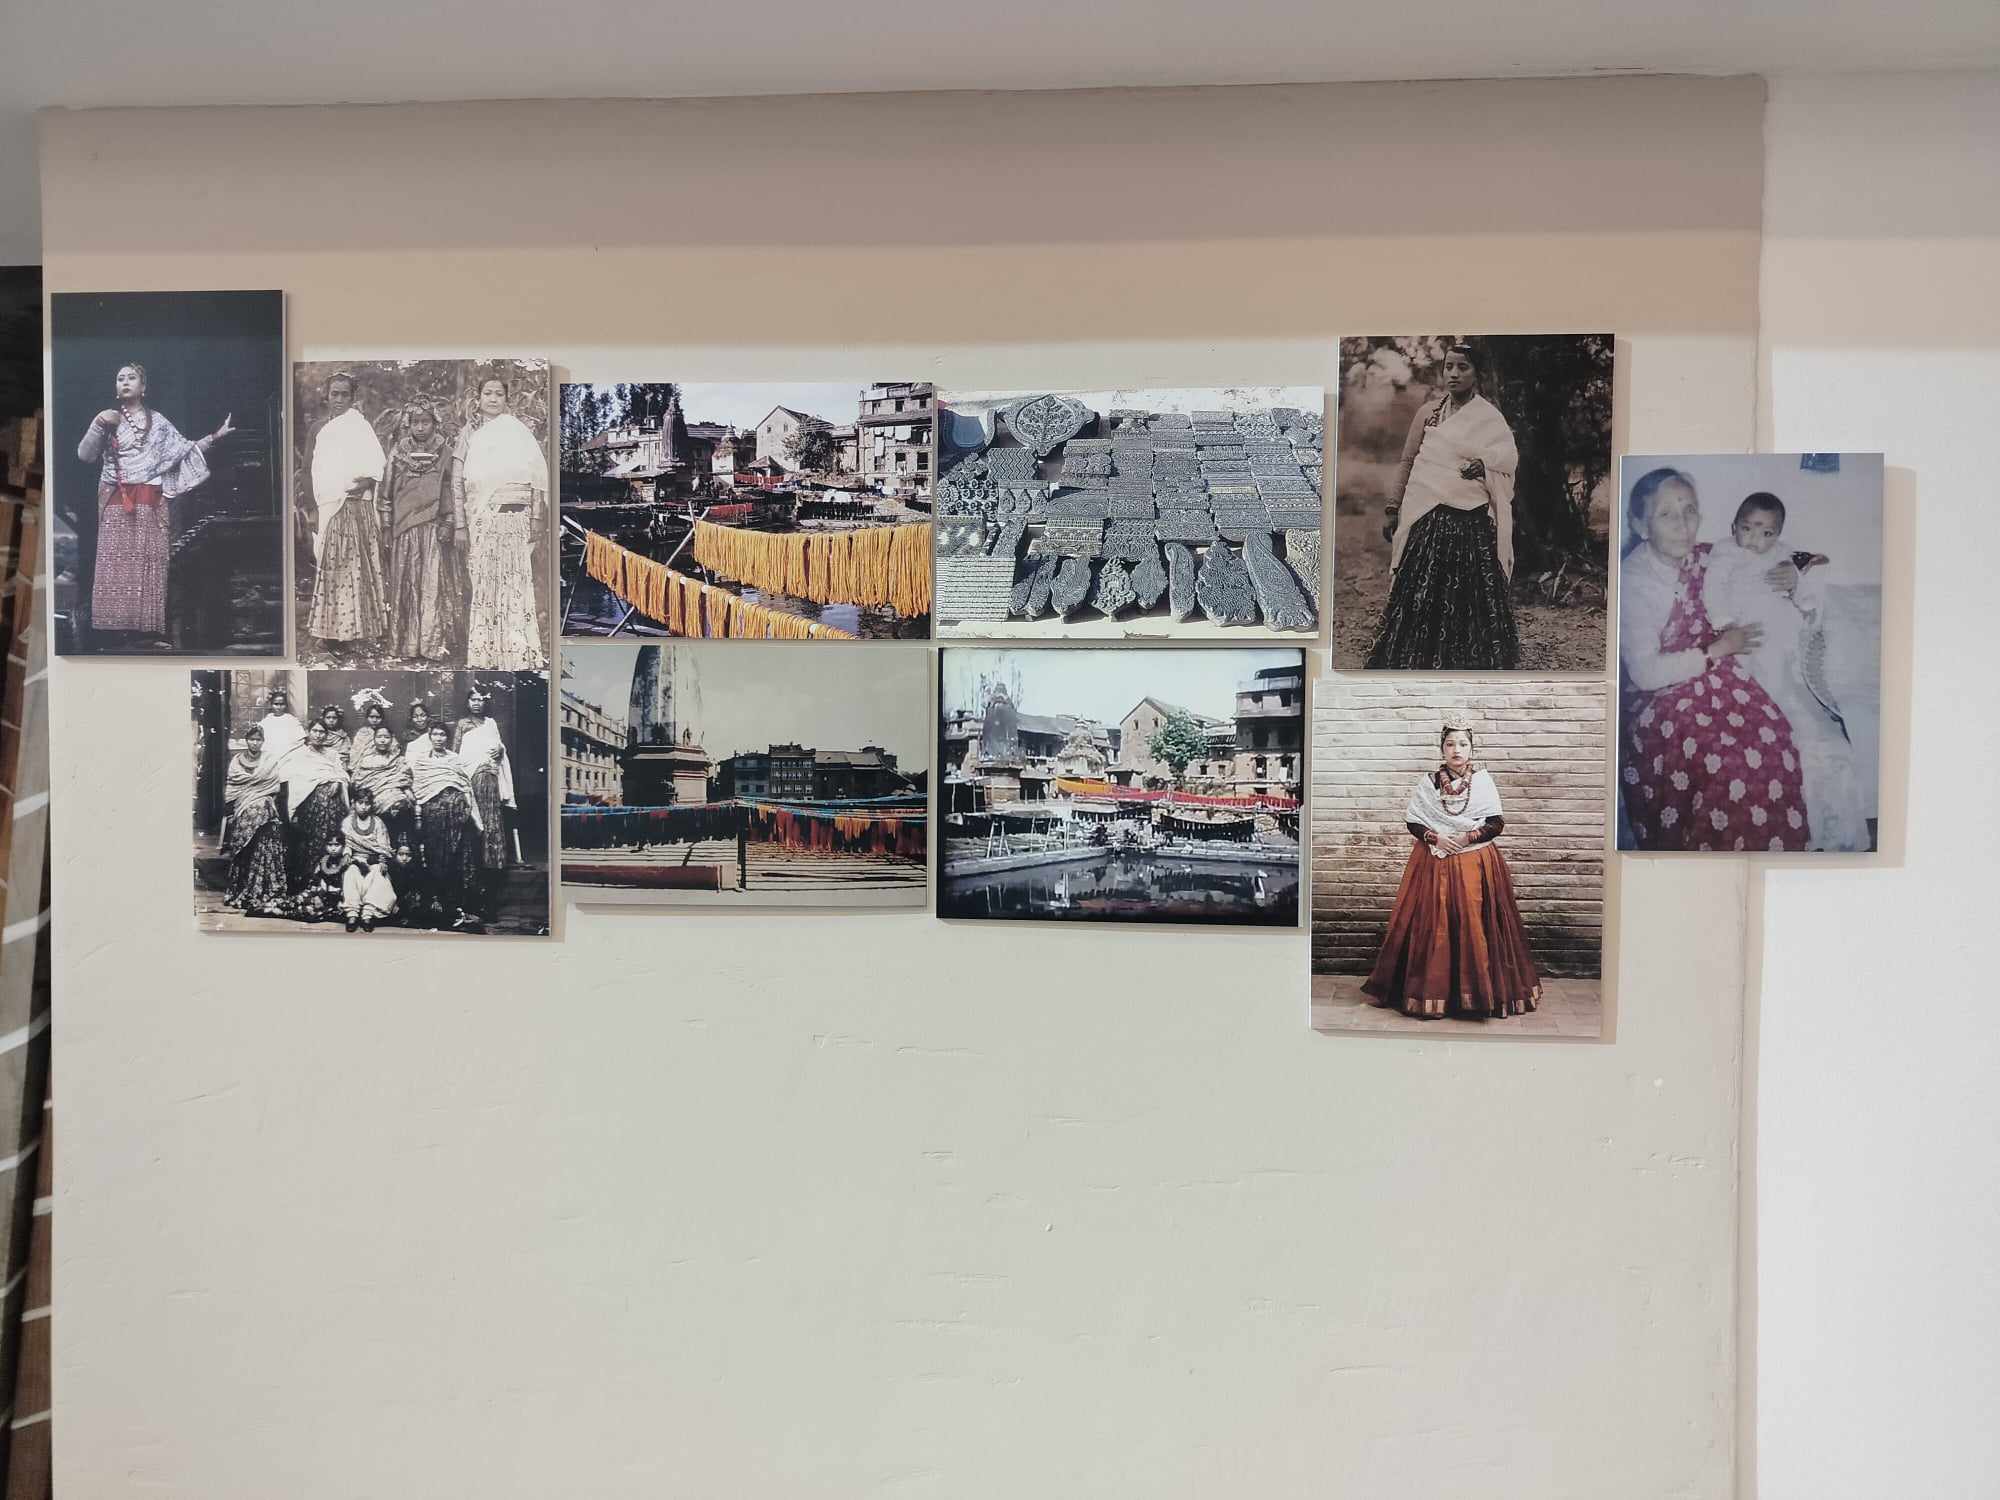 Photographs dedicated to pay homage to Chippa community in the exhibition.